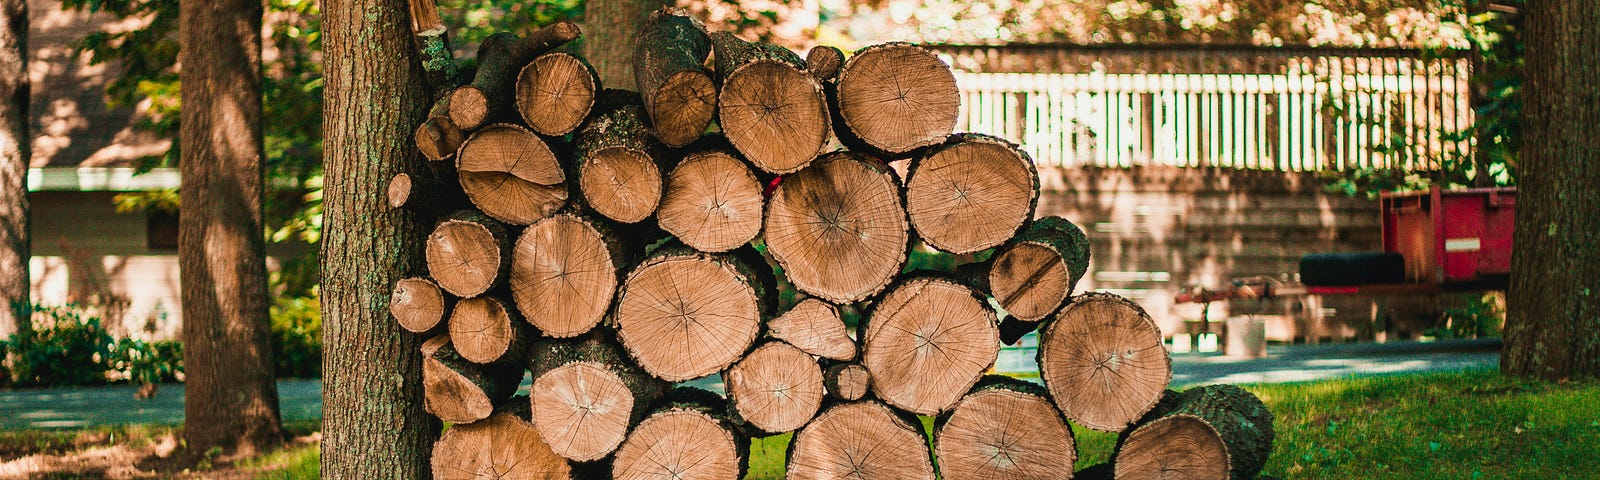 Logs stacked up against a tree.